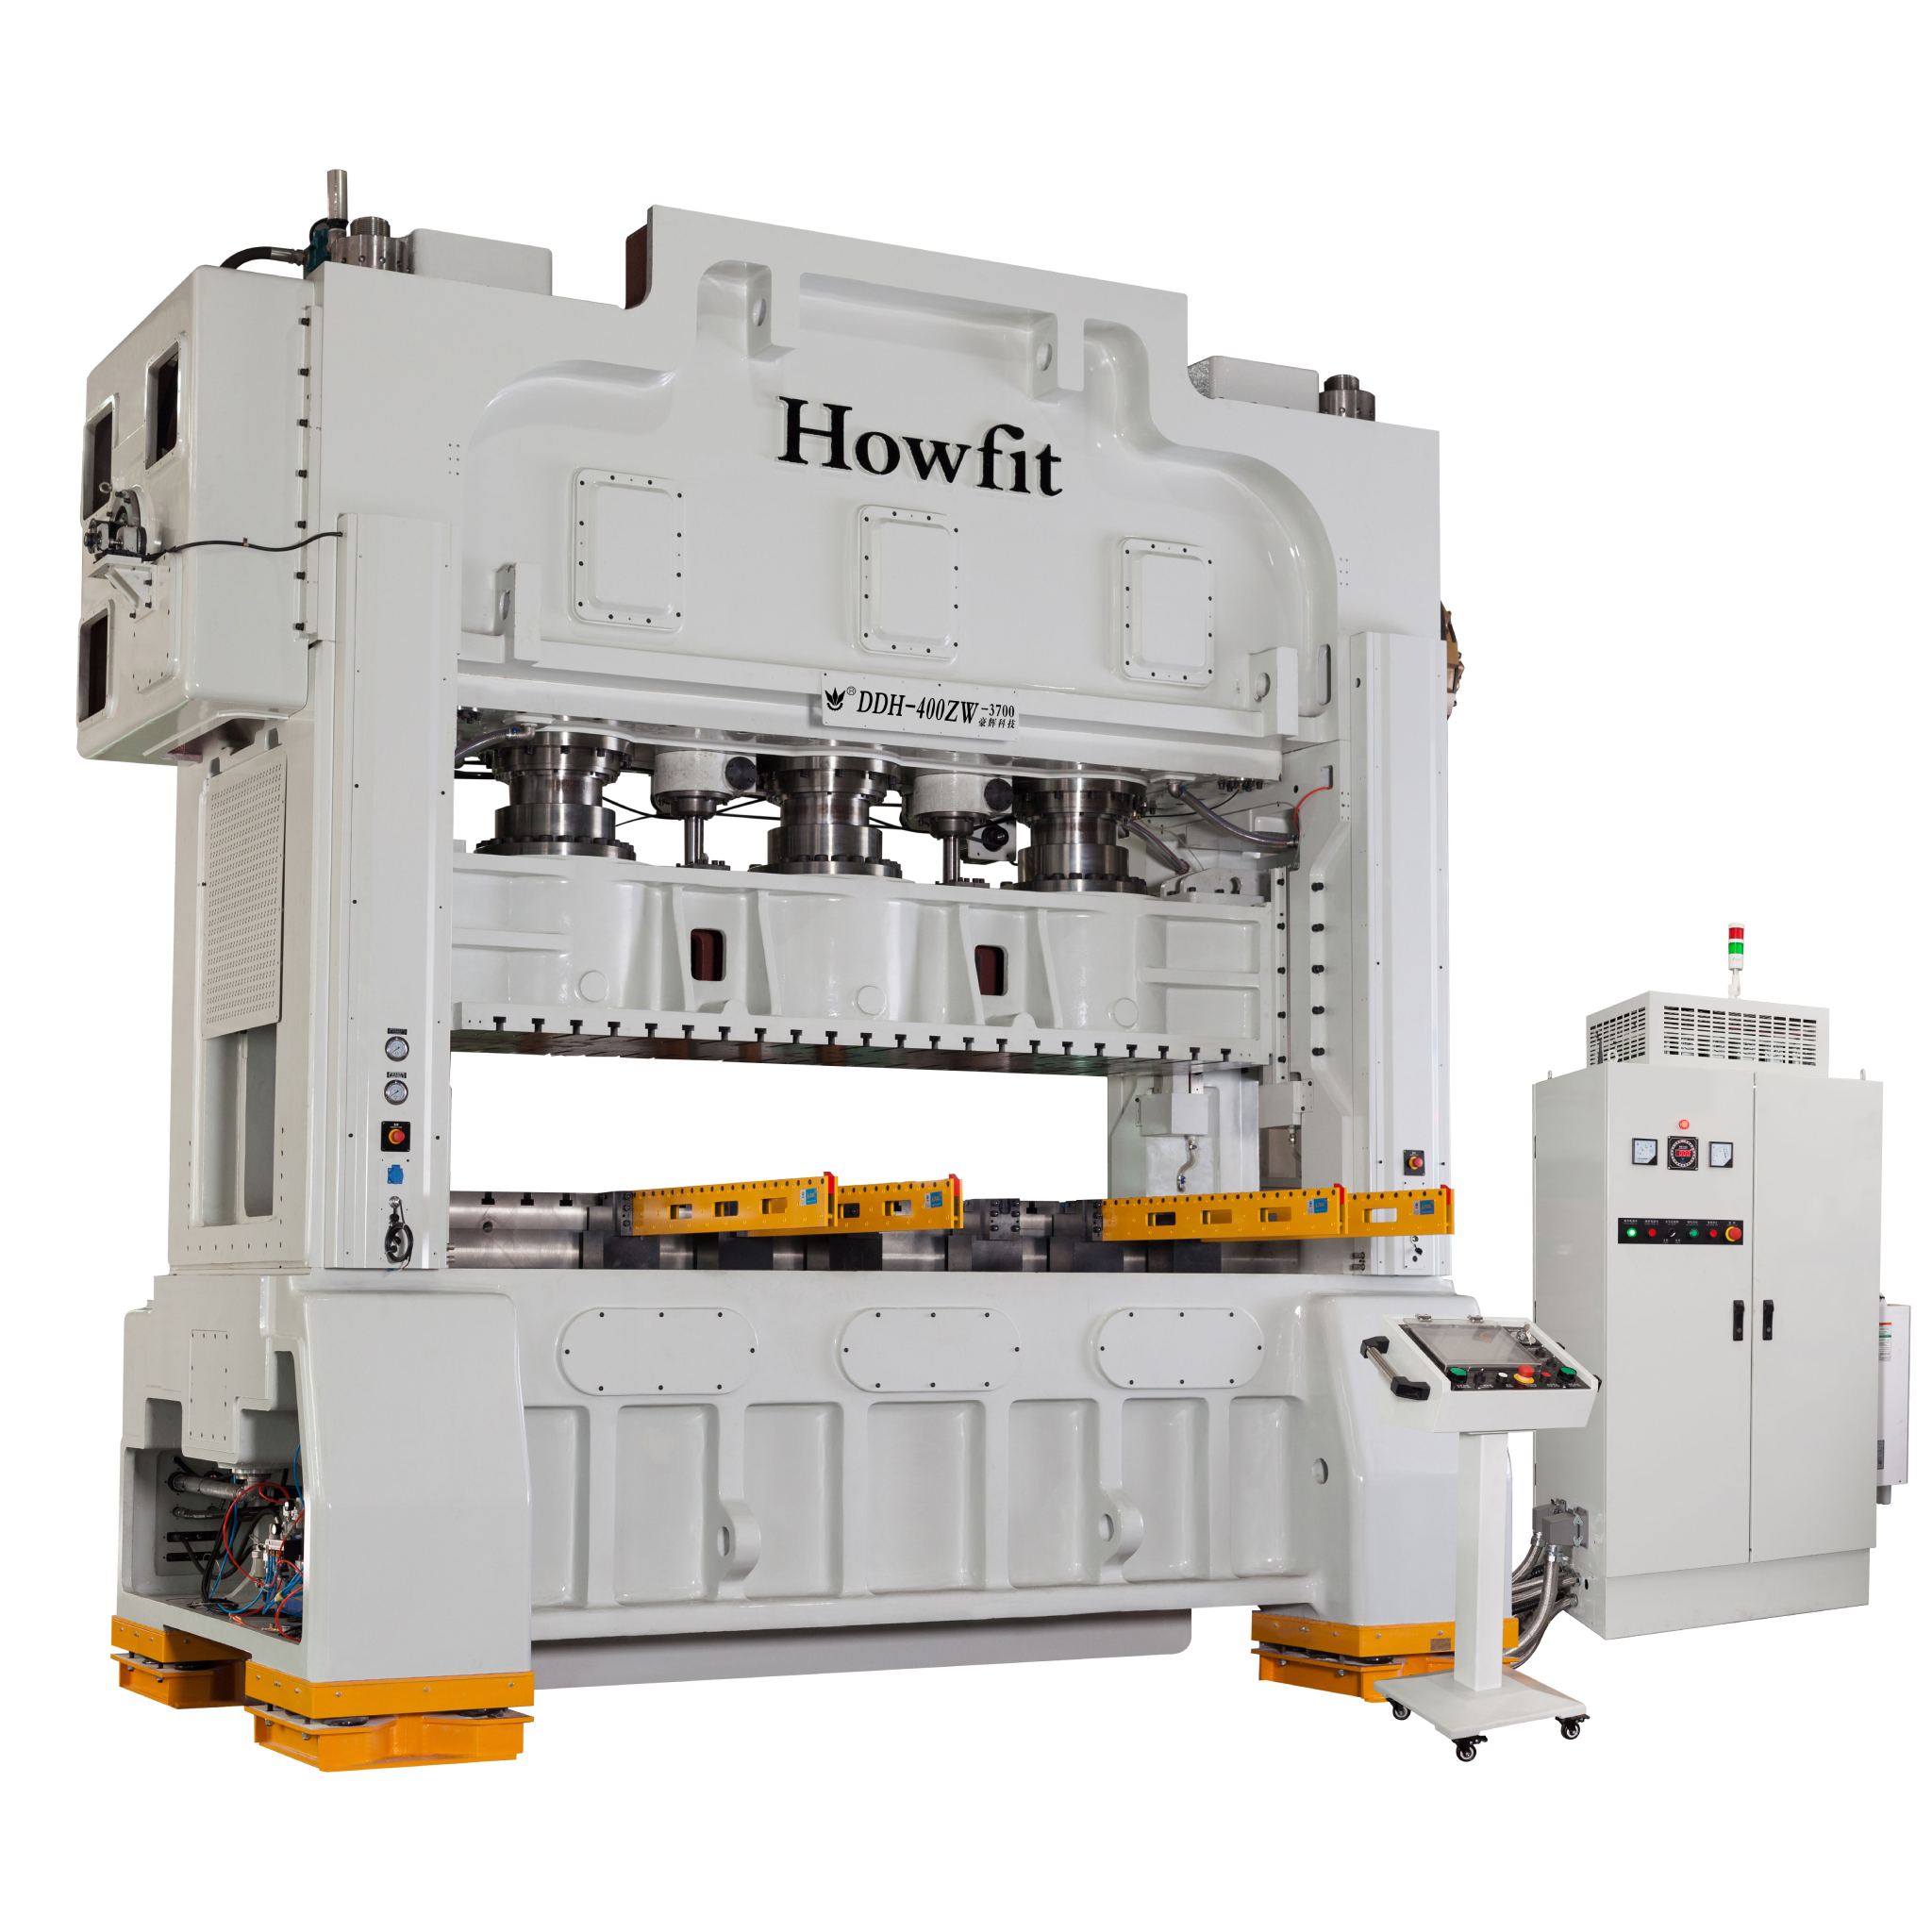 HOWFIT DDH 400T ZW-3700 high-speed precision punching machine